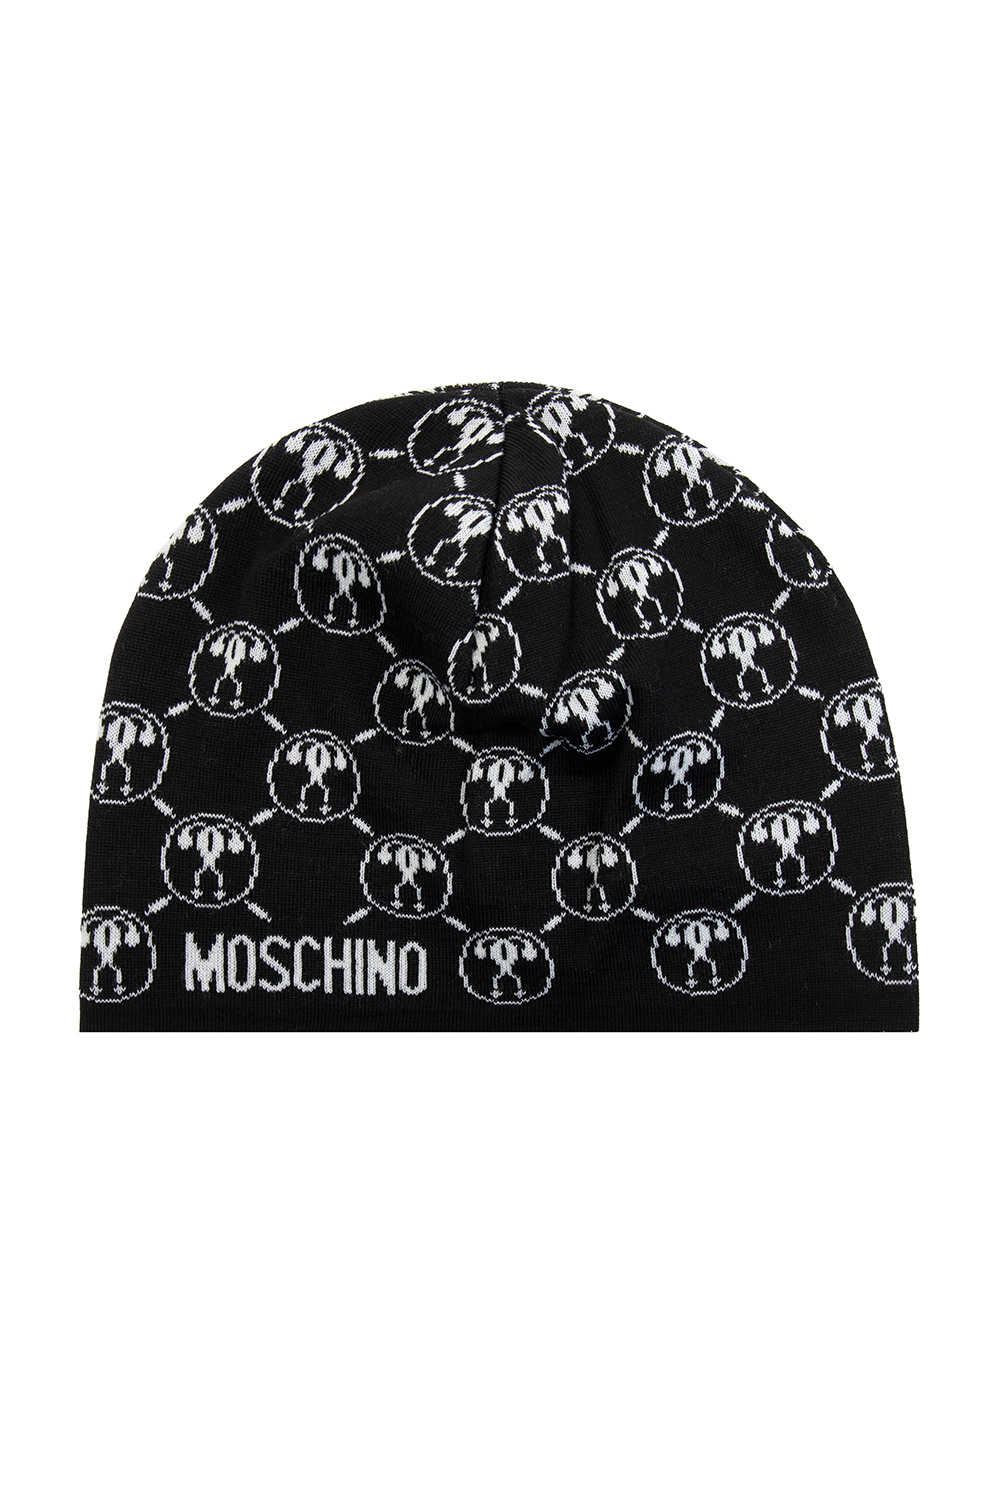 Moschino Woof Wear Hat Cover